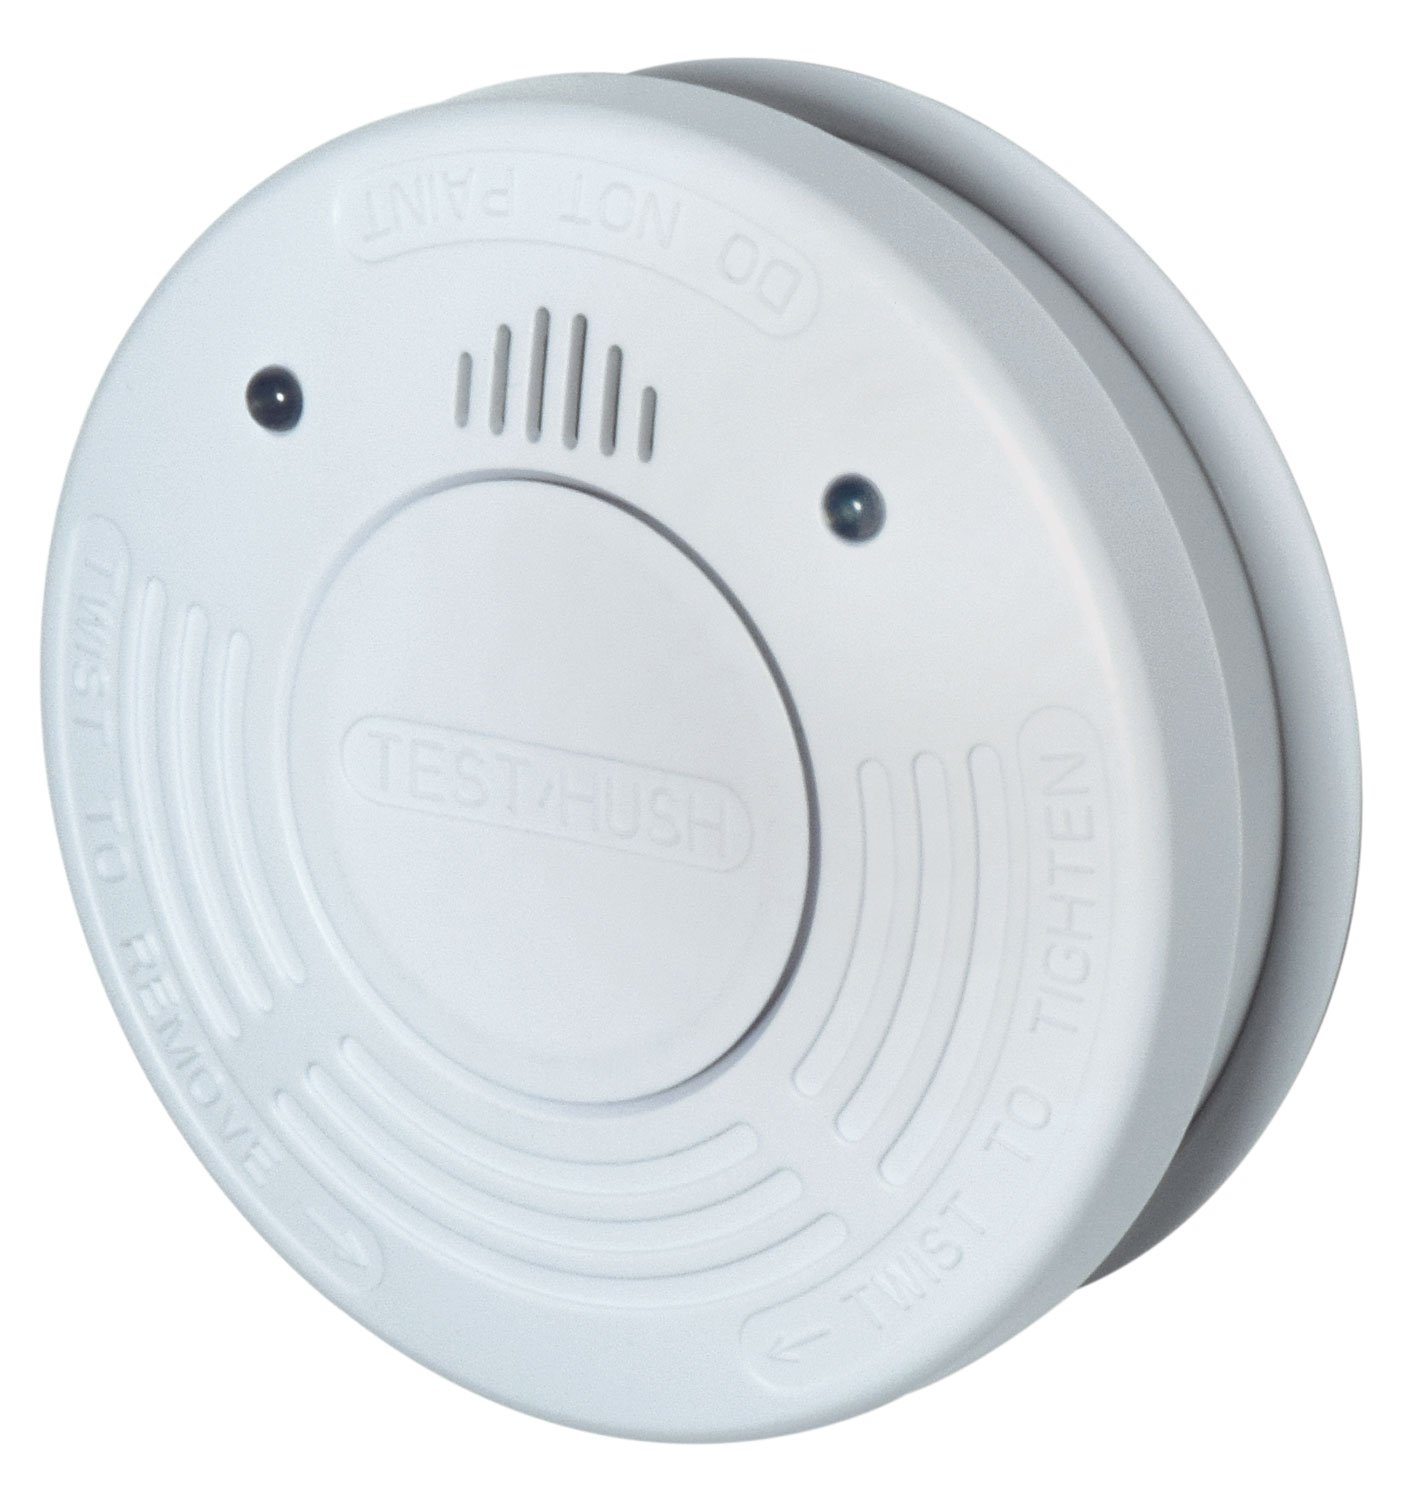 Photoelectric Smoke Detector with 10 Year Sealed Battery Photoelectric Smoke Detector with 10 Year Sealed Battery